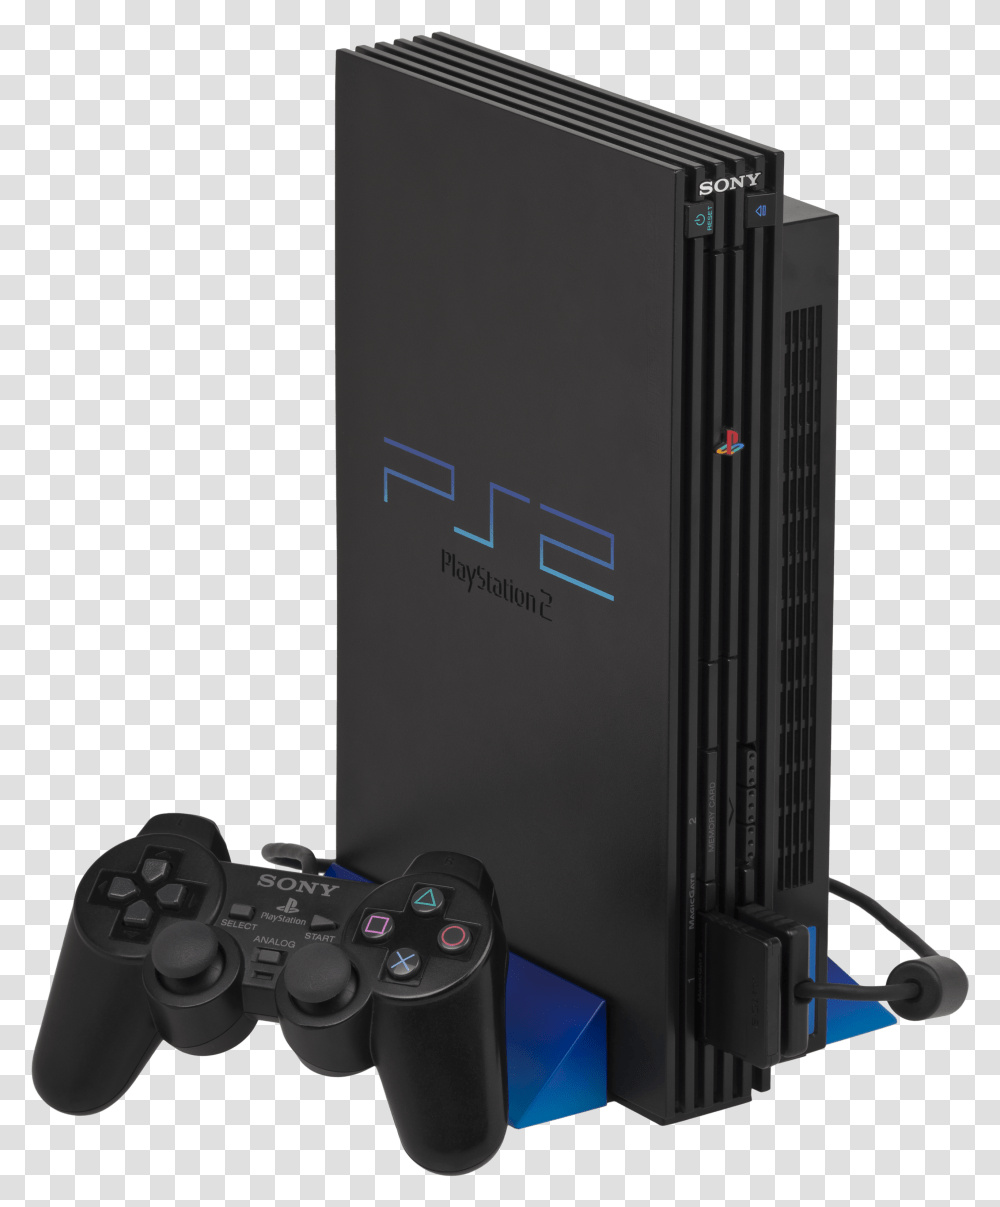 Sixth Generation Of Video Game Consoles Ps2 Price In Pakistan 2019 Transparent Png